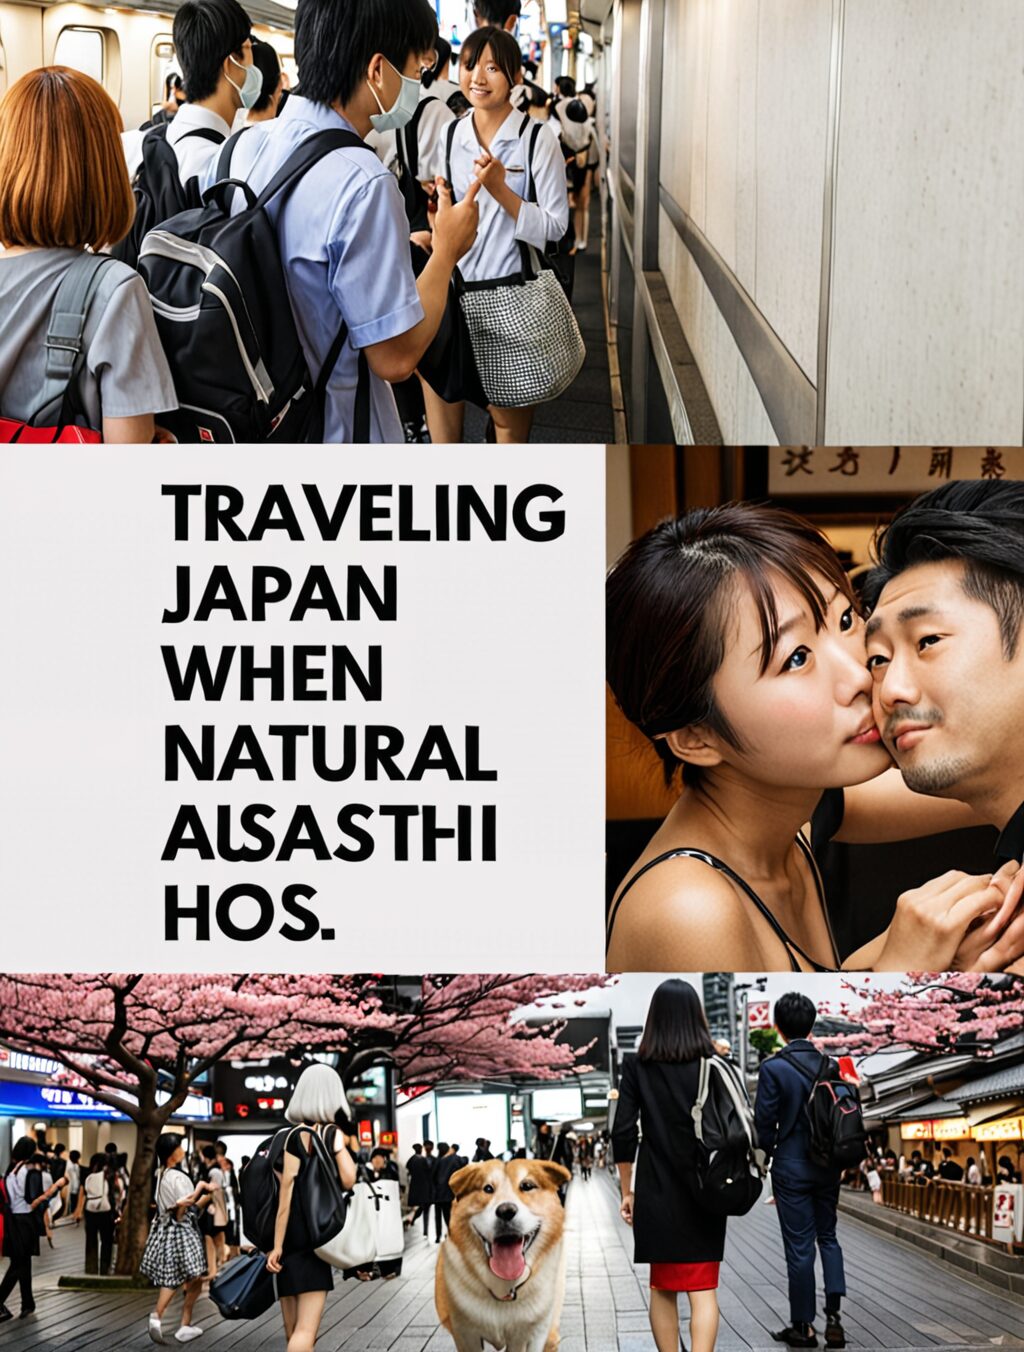 worst time to visit japan from australia